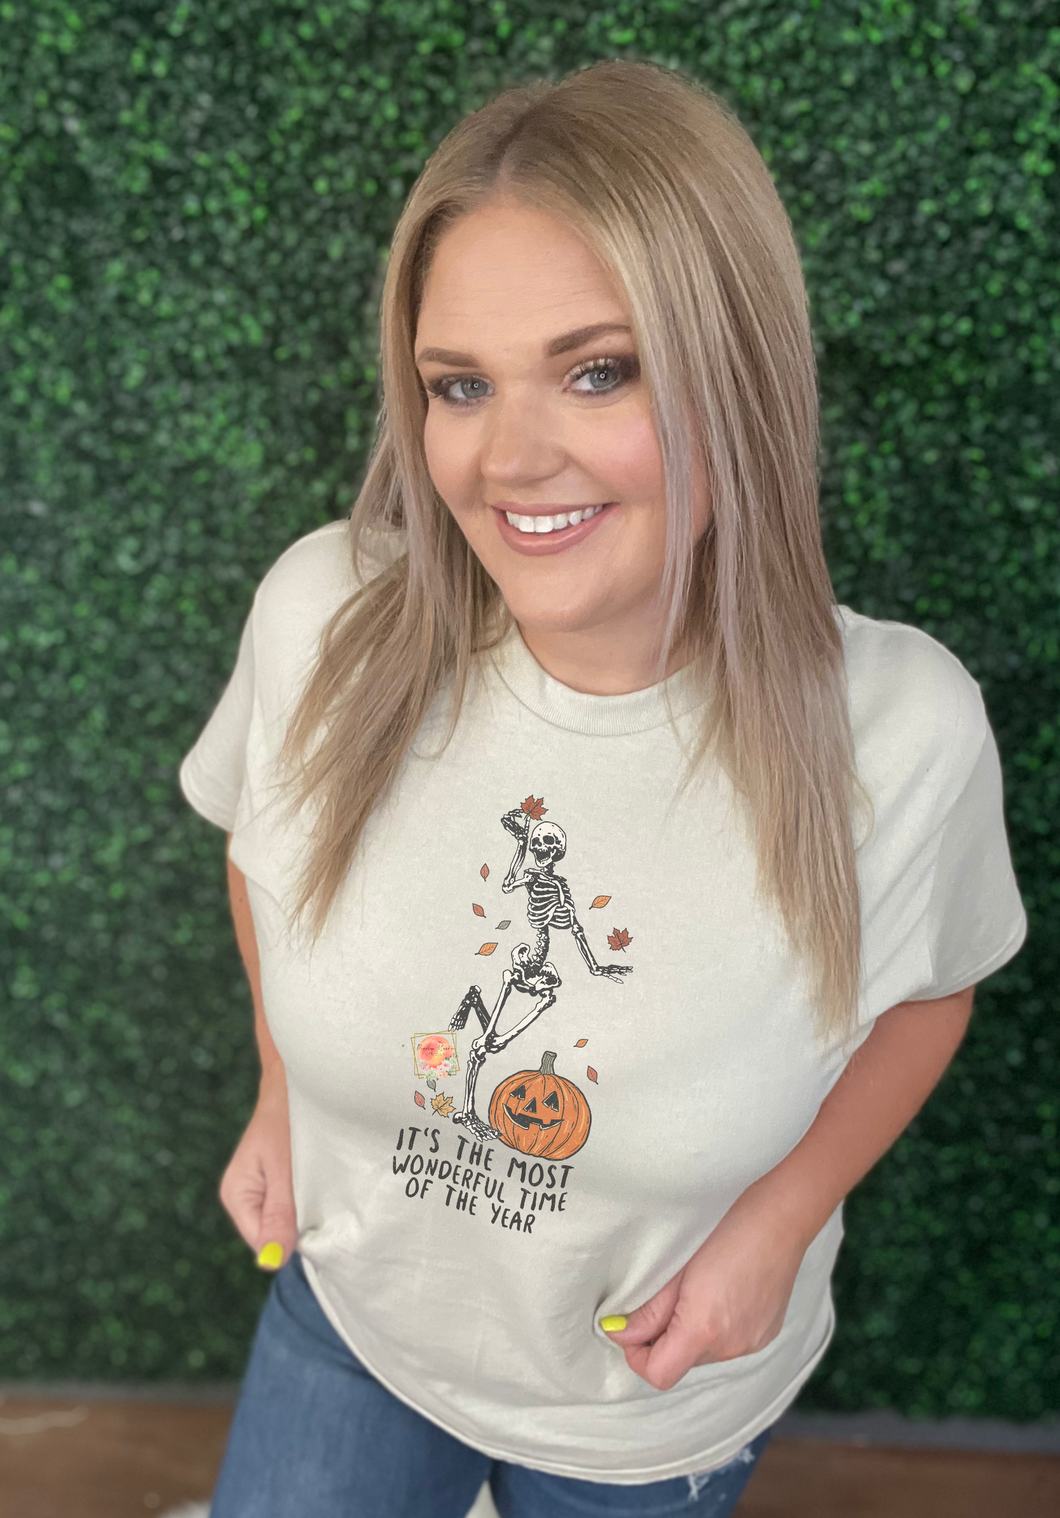 Most wonderful time of the year skelly tee